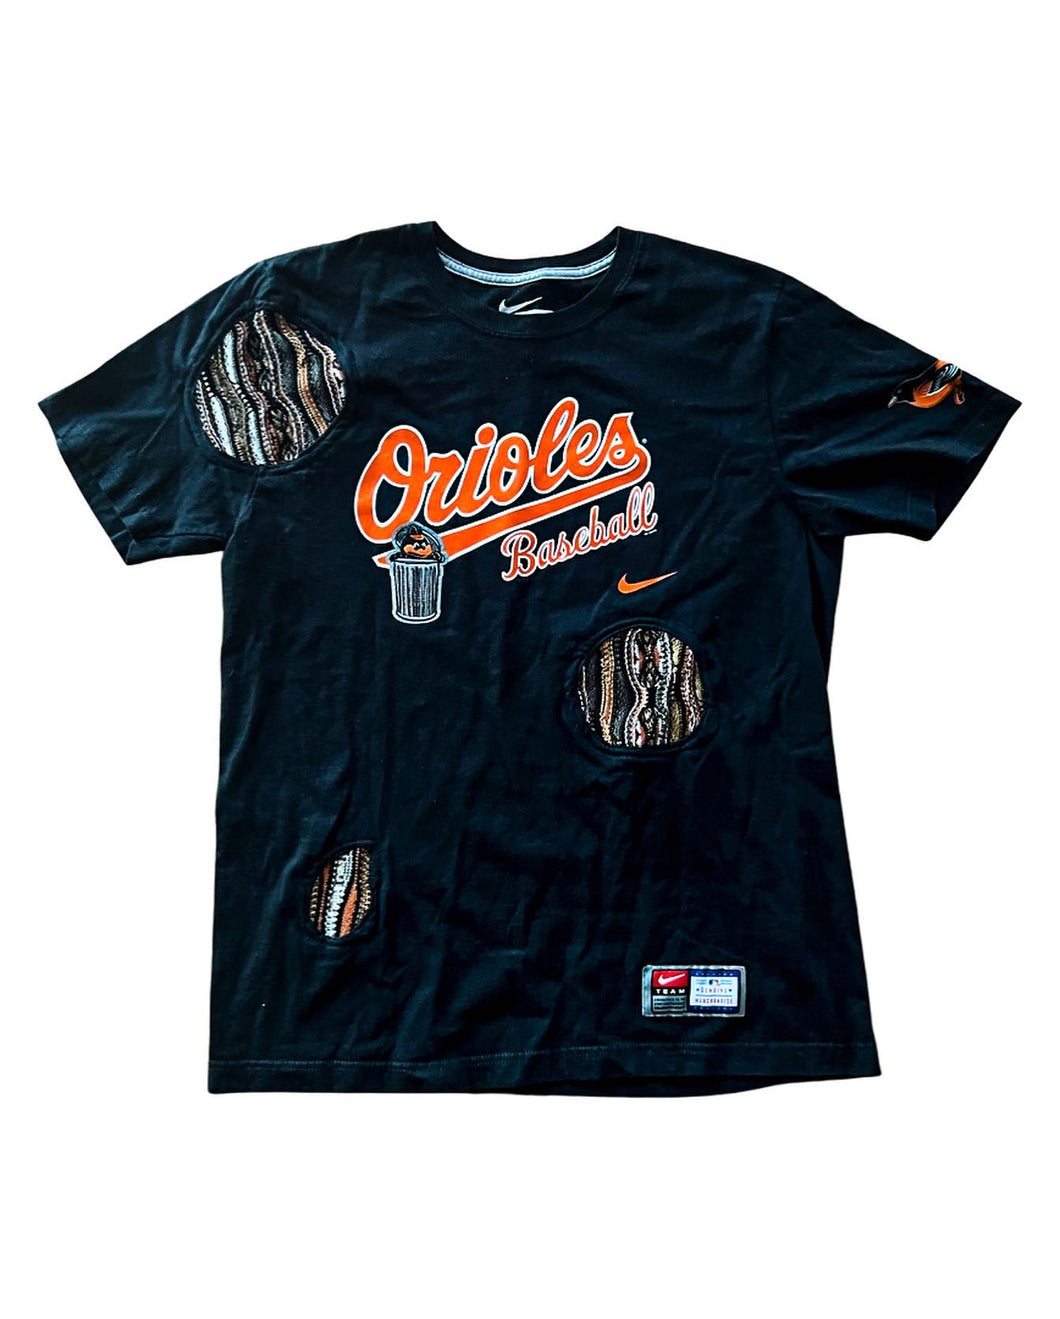 O’s mixed Field tee size Large